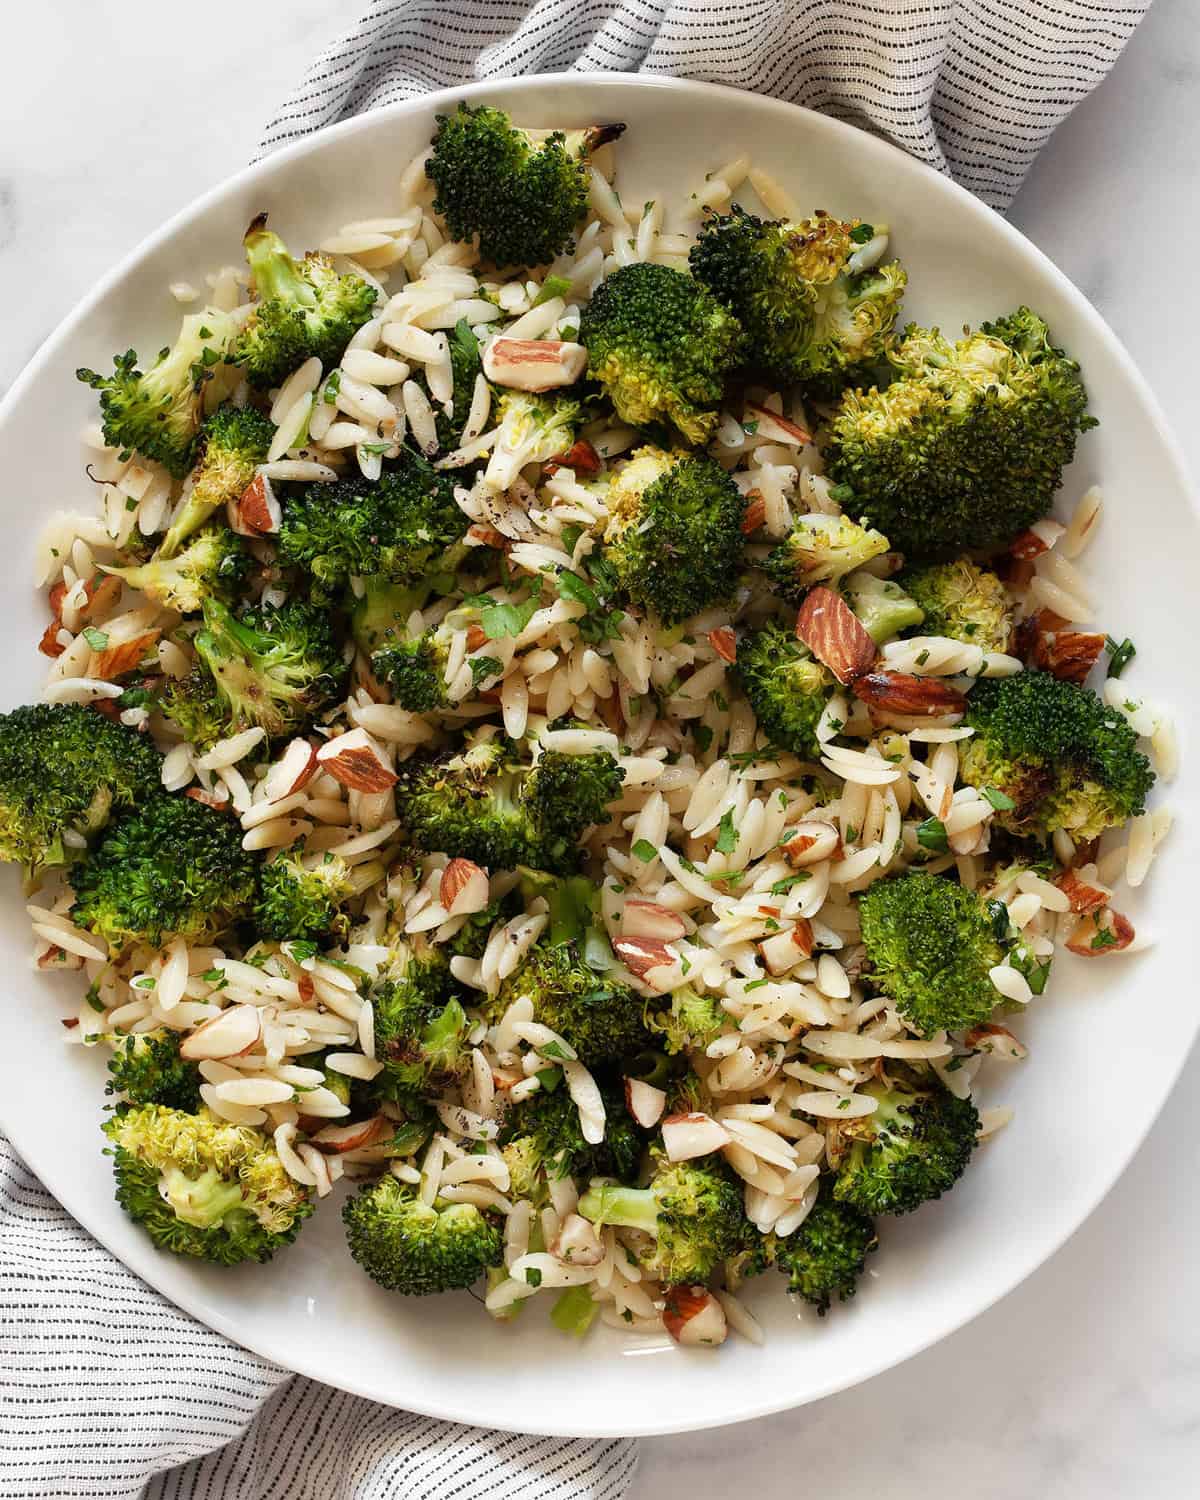 Orzo with roasted broccoli, almonds, lemon and garlic on a plate.